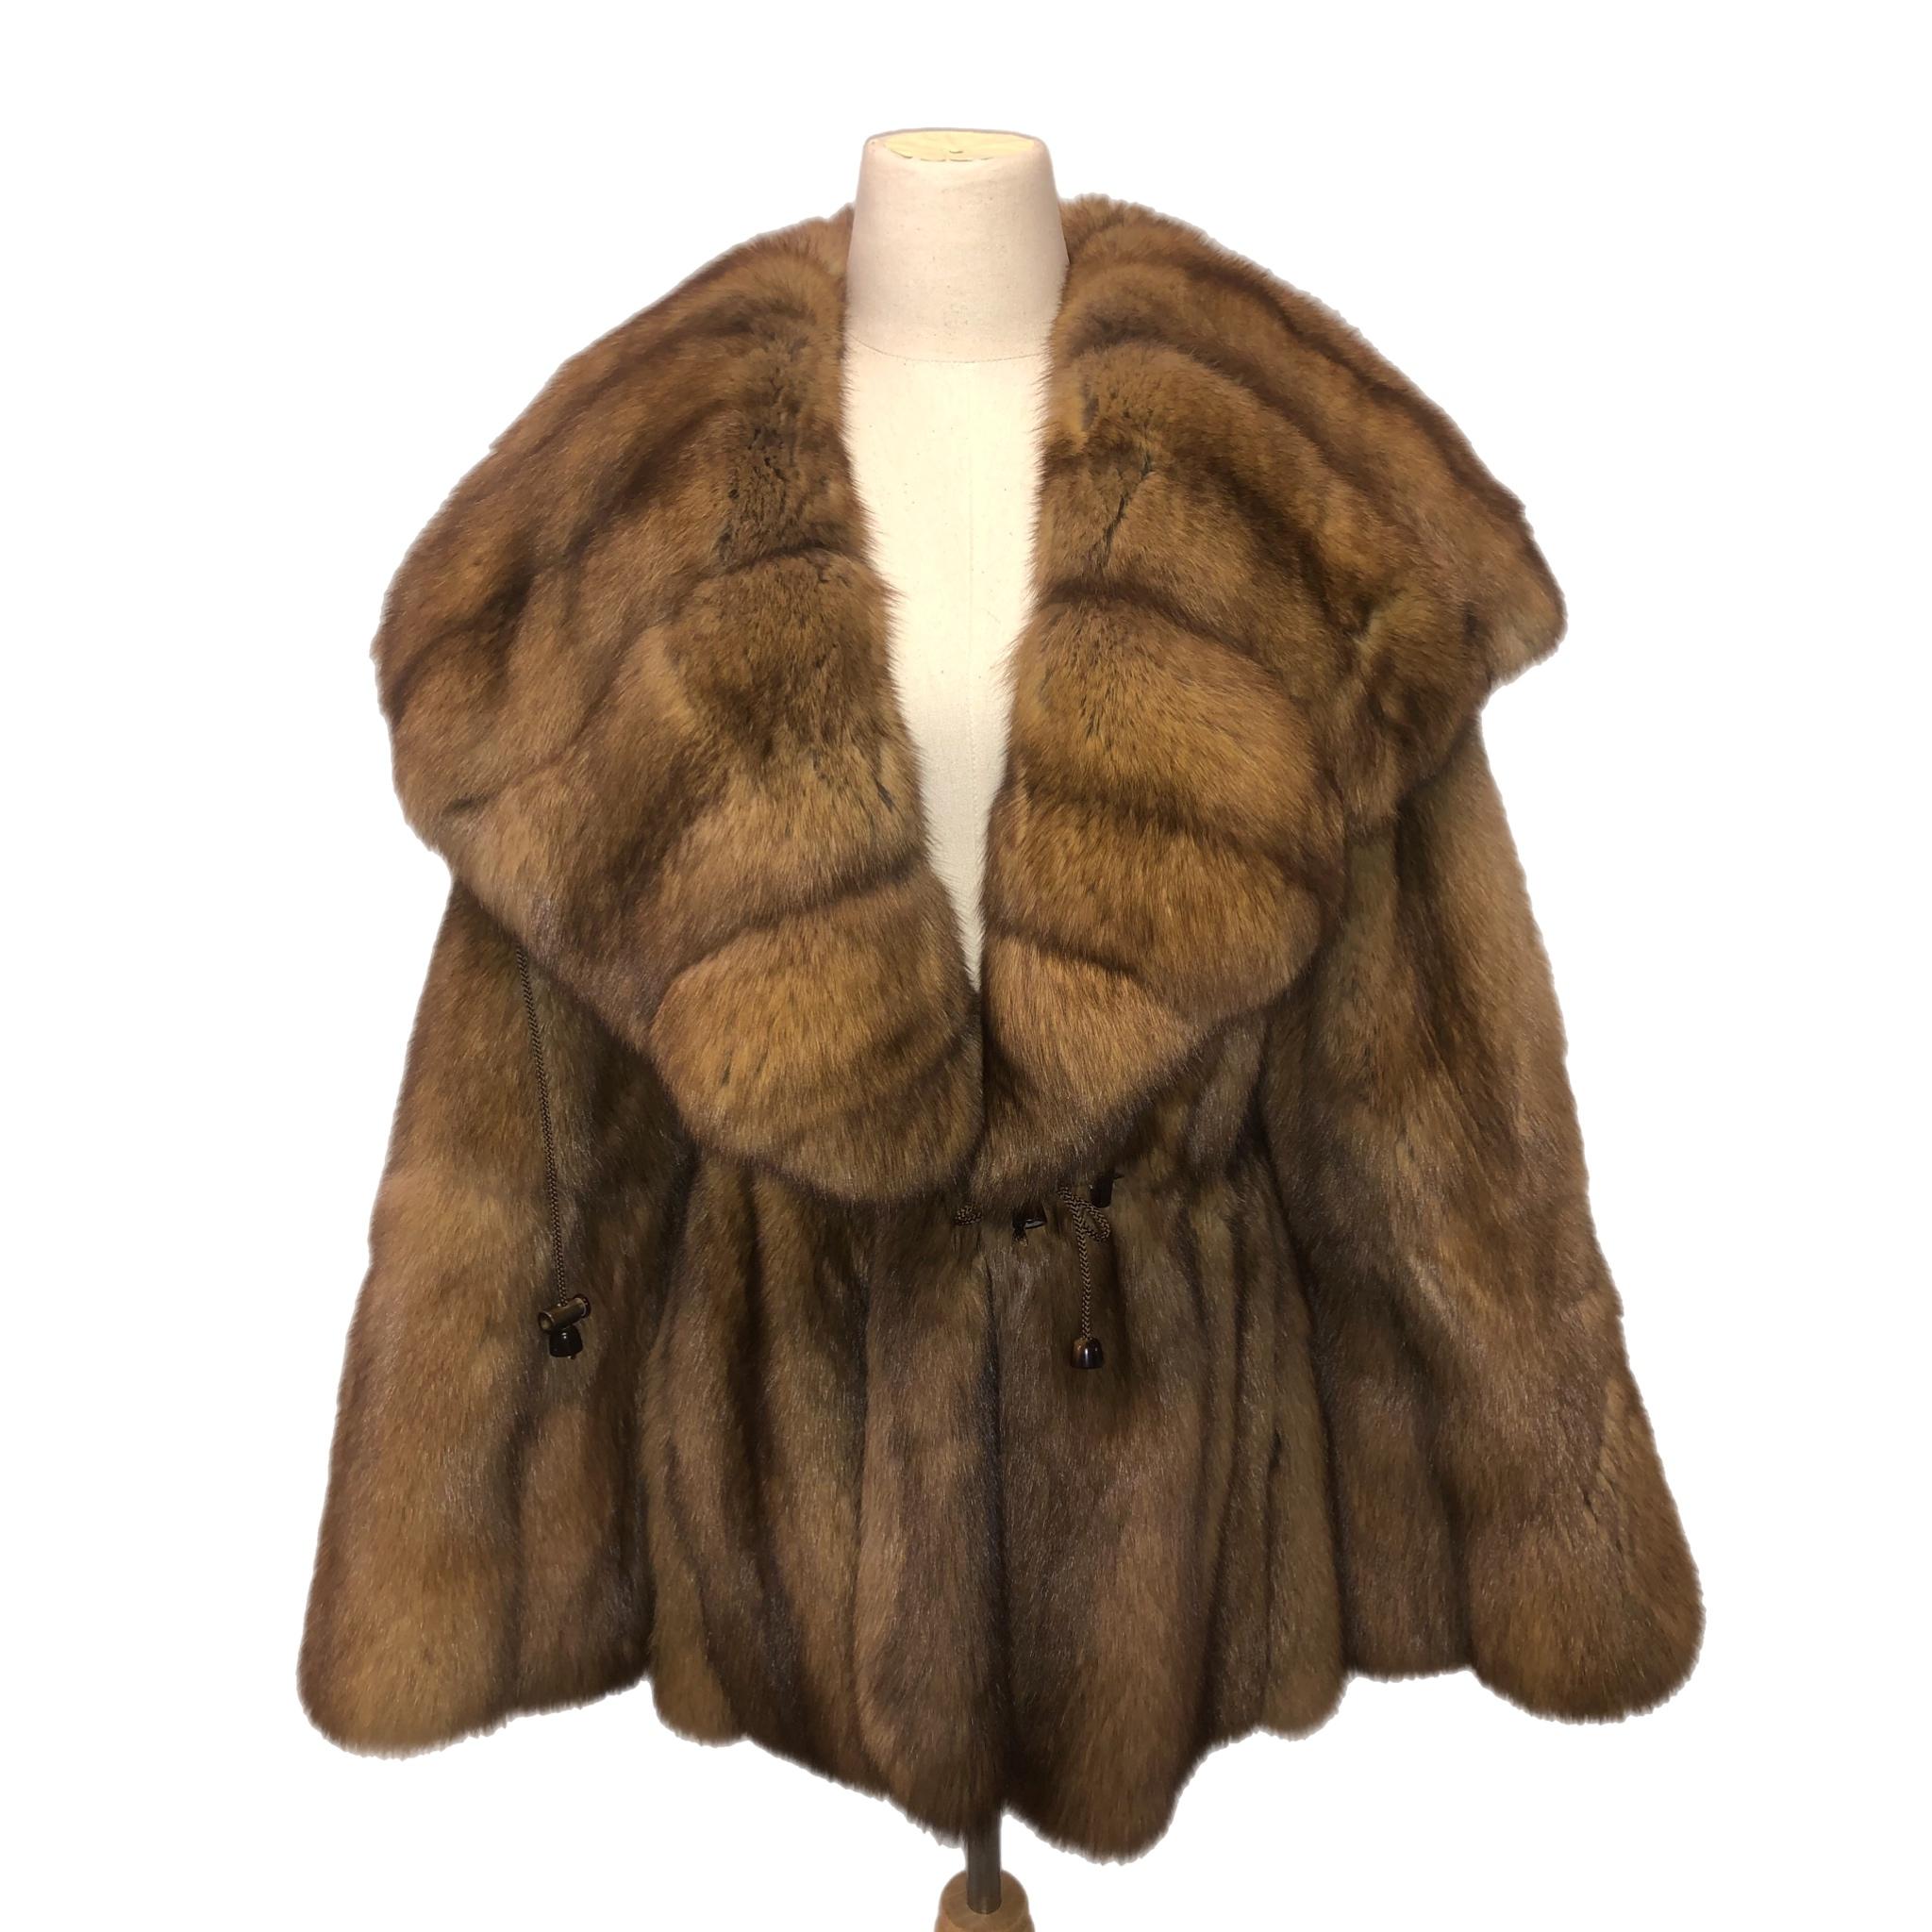 Bisang Russian Sable fur coat size 14-16 tags 65000$ For Sale 1